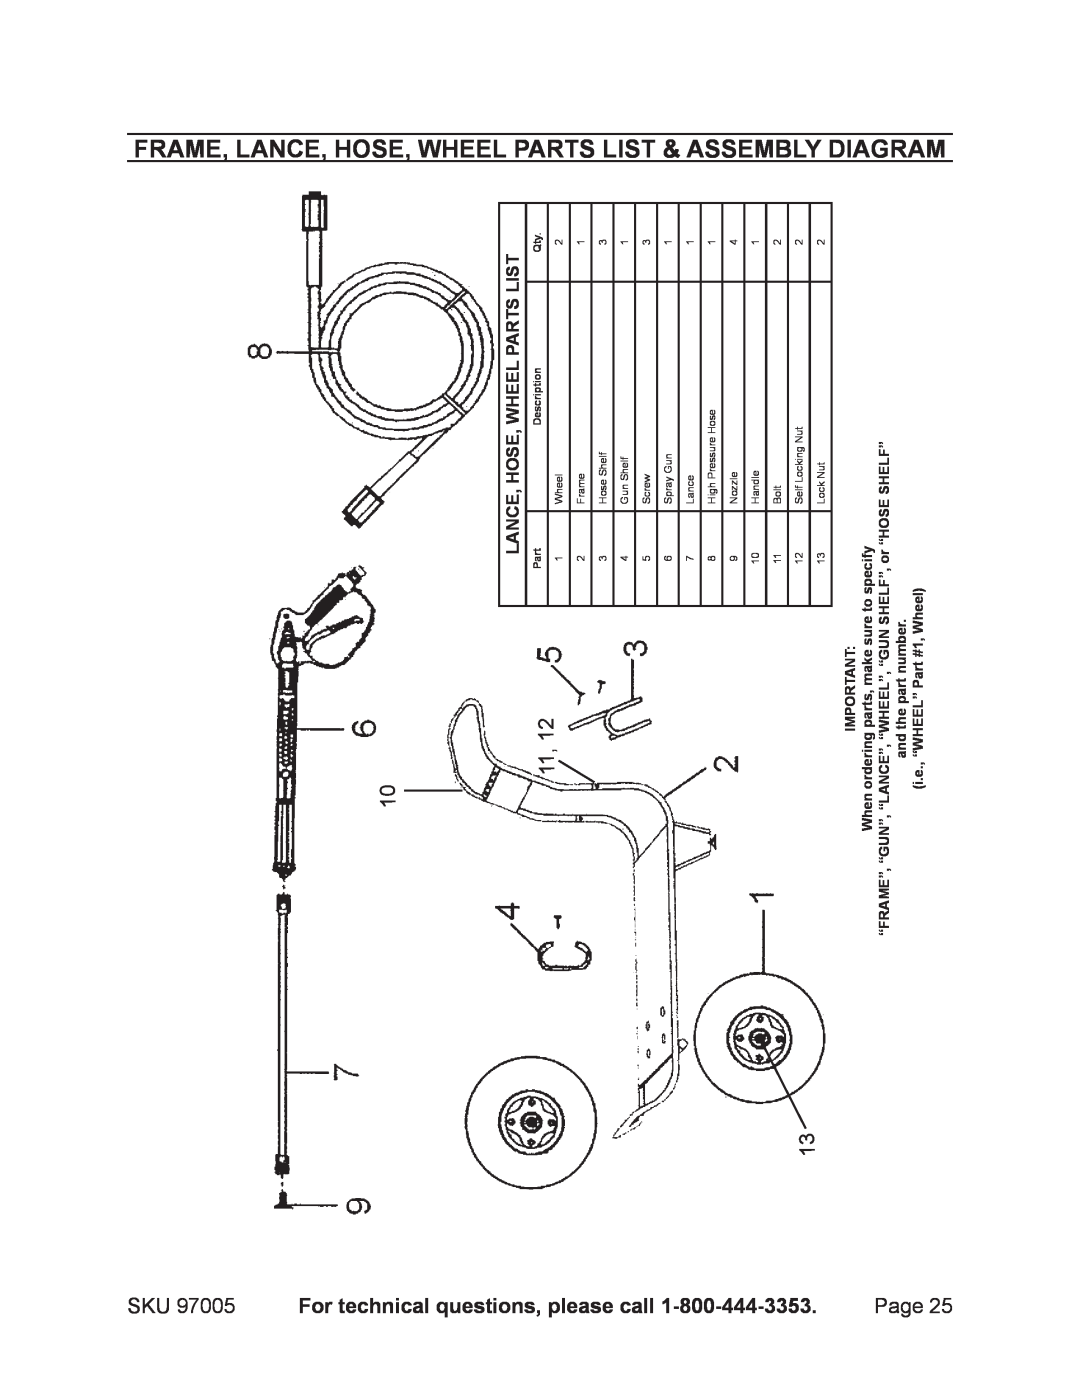 Harbor Freight Tools 97005 Frame, Lance, Hose, Wheel Parts List & Assembly Diagram, For technical questions, please call 